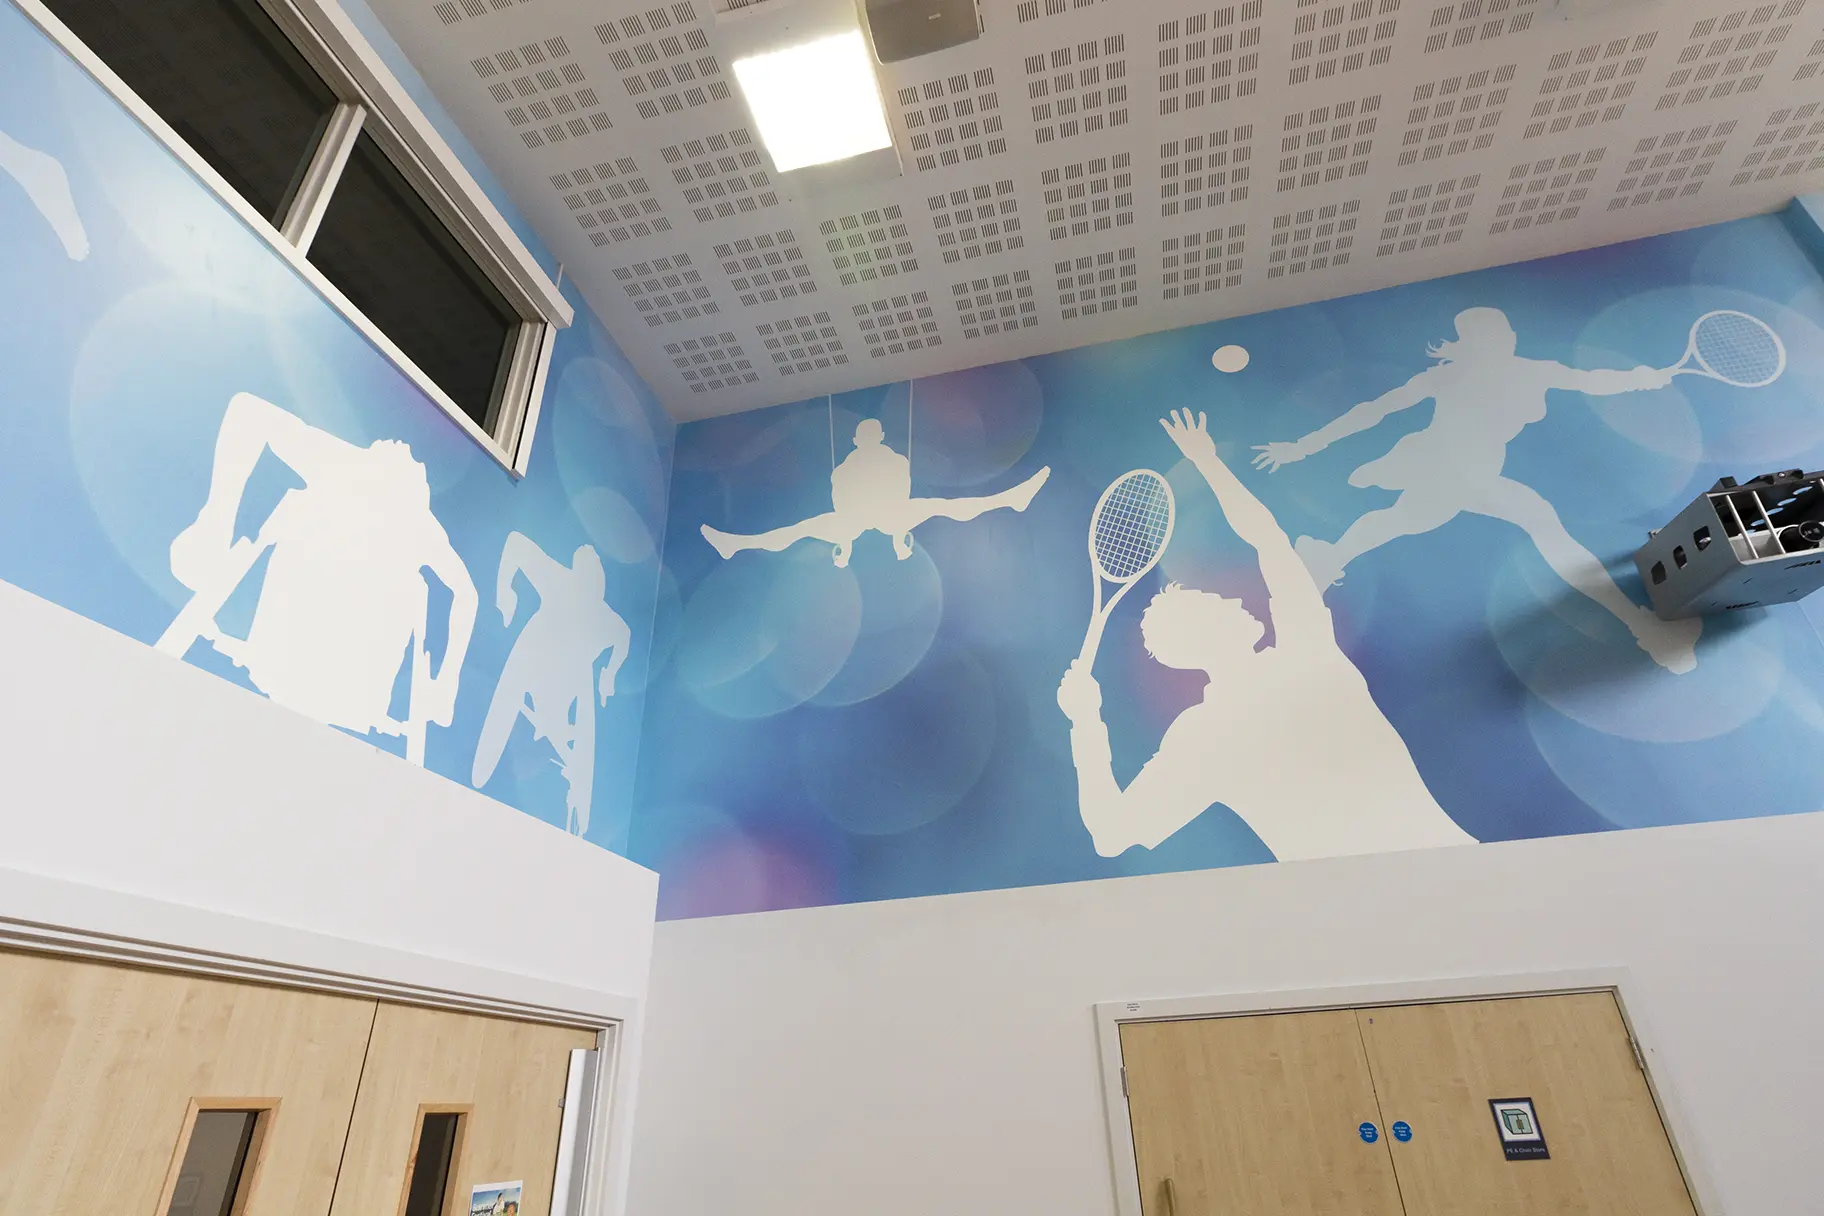 School sports hall walls brought to life with Wall Art